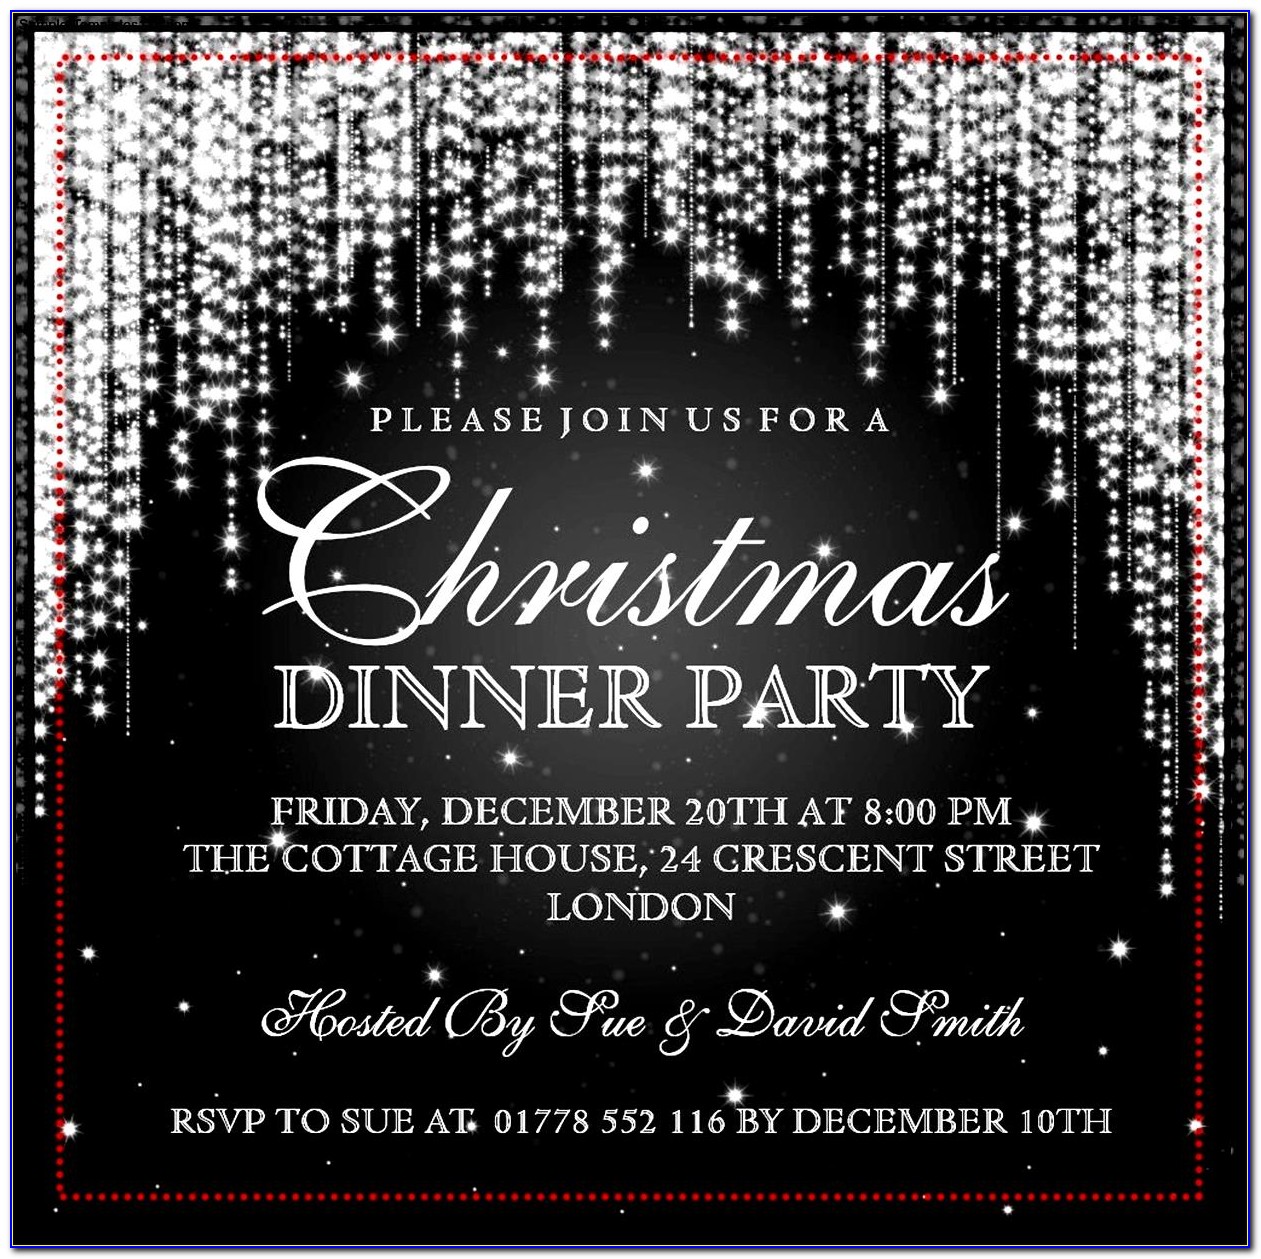 Elegant Christmas Party Invitation Template Free Download